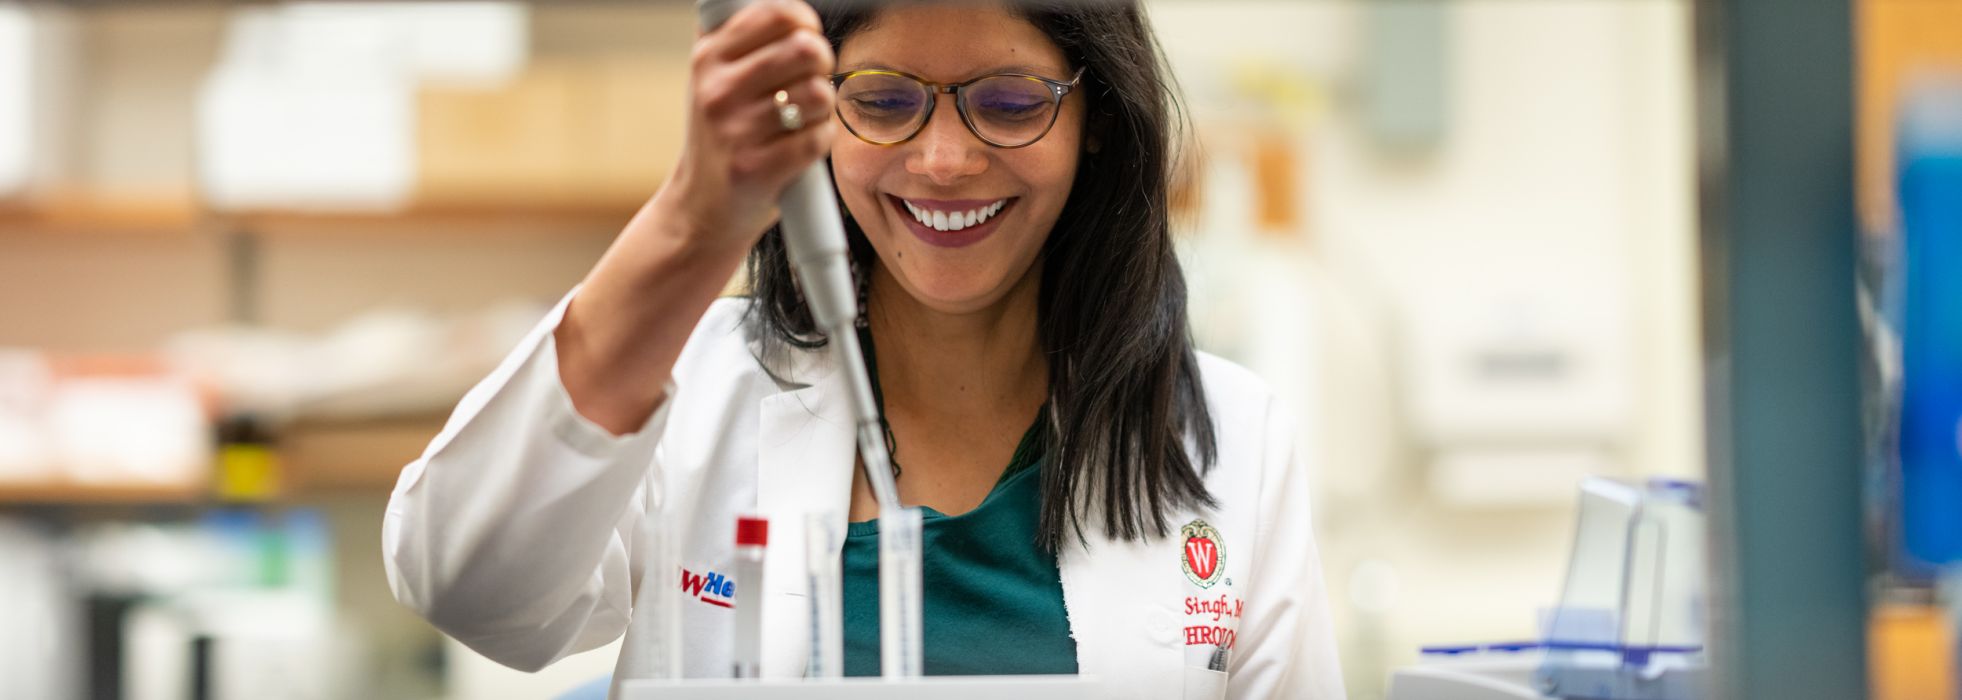 Dr. Tripti Singh wearing a white coat working with a pipette in the lab 